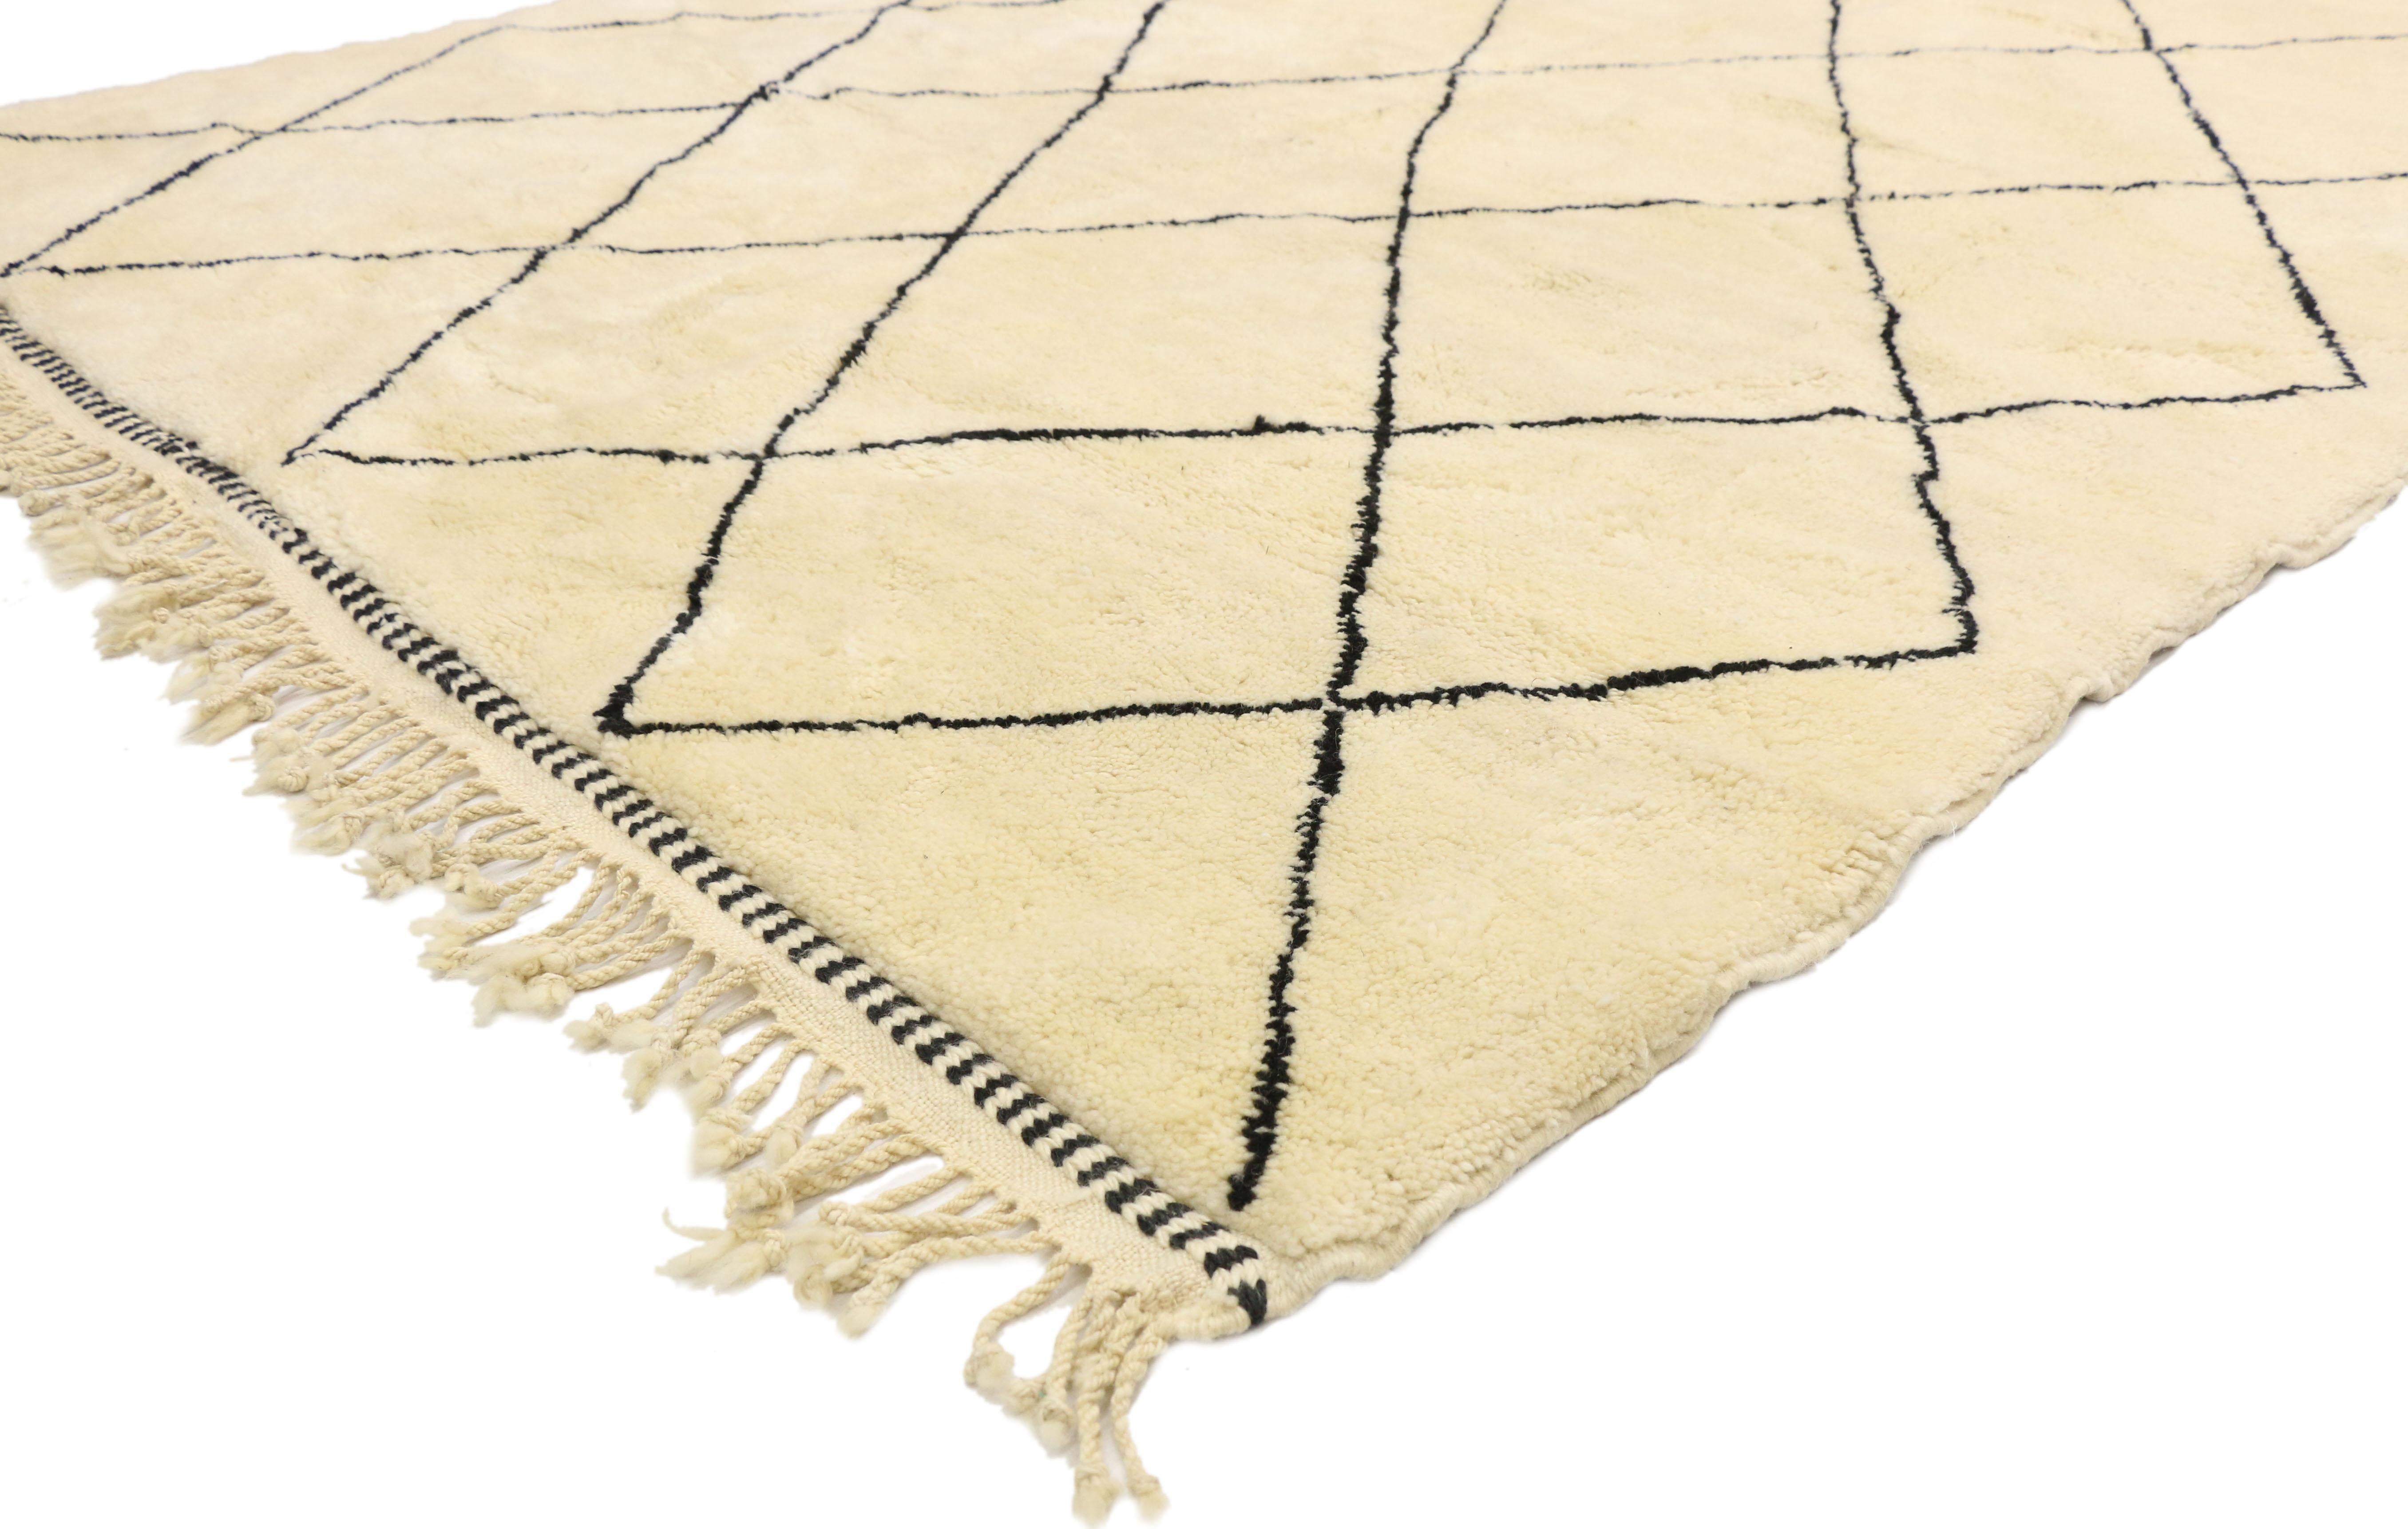 20761, New Contemporary Modern Style Beni Ourain Moroccan Rug with Hygge Vibes. This hand-knotted wool contemporary Beni Ourain Moroccan rug features a simplistic all-over diamond lattice pattern spread across an abrashed creamy-vanilla beige field.